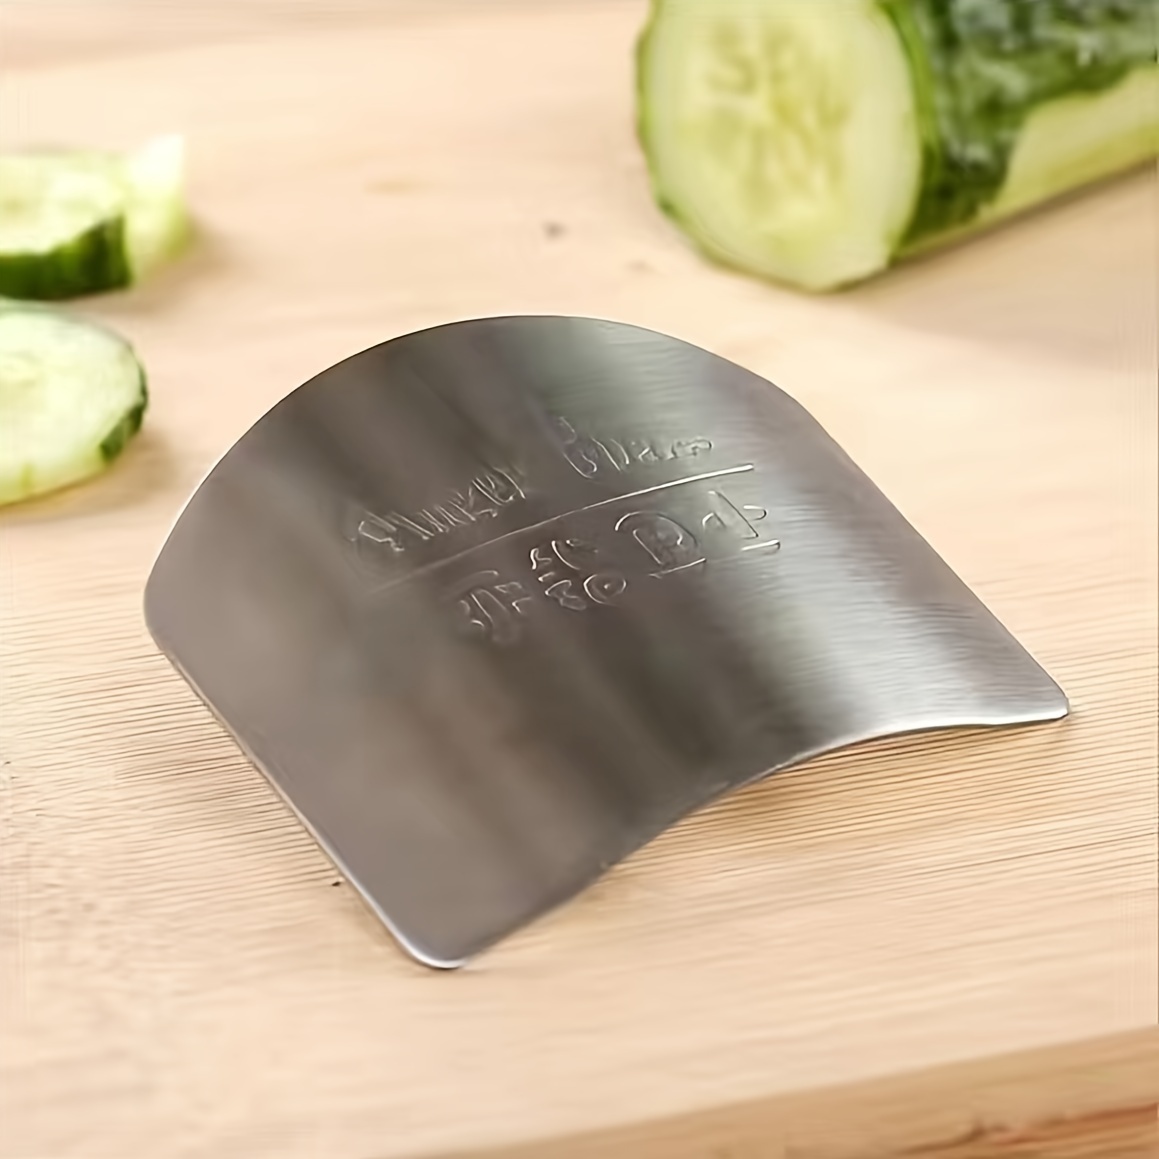 Stainless Steel Finger Guard For Cutting And Peeling - Temu